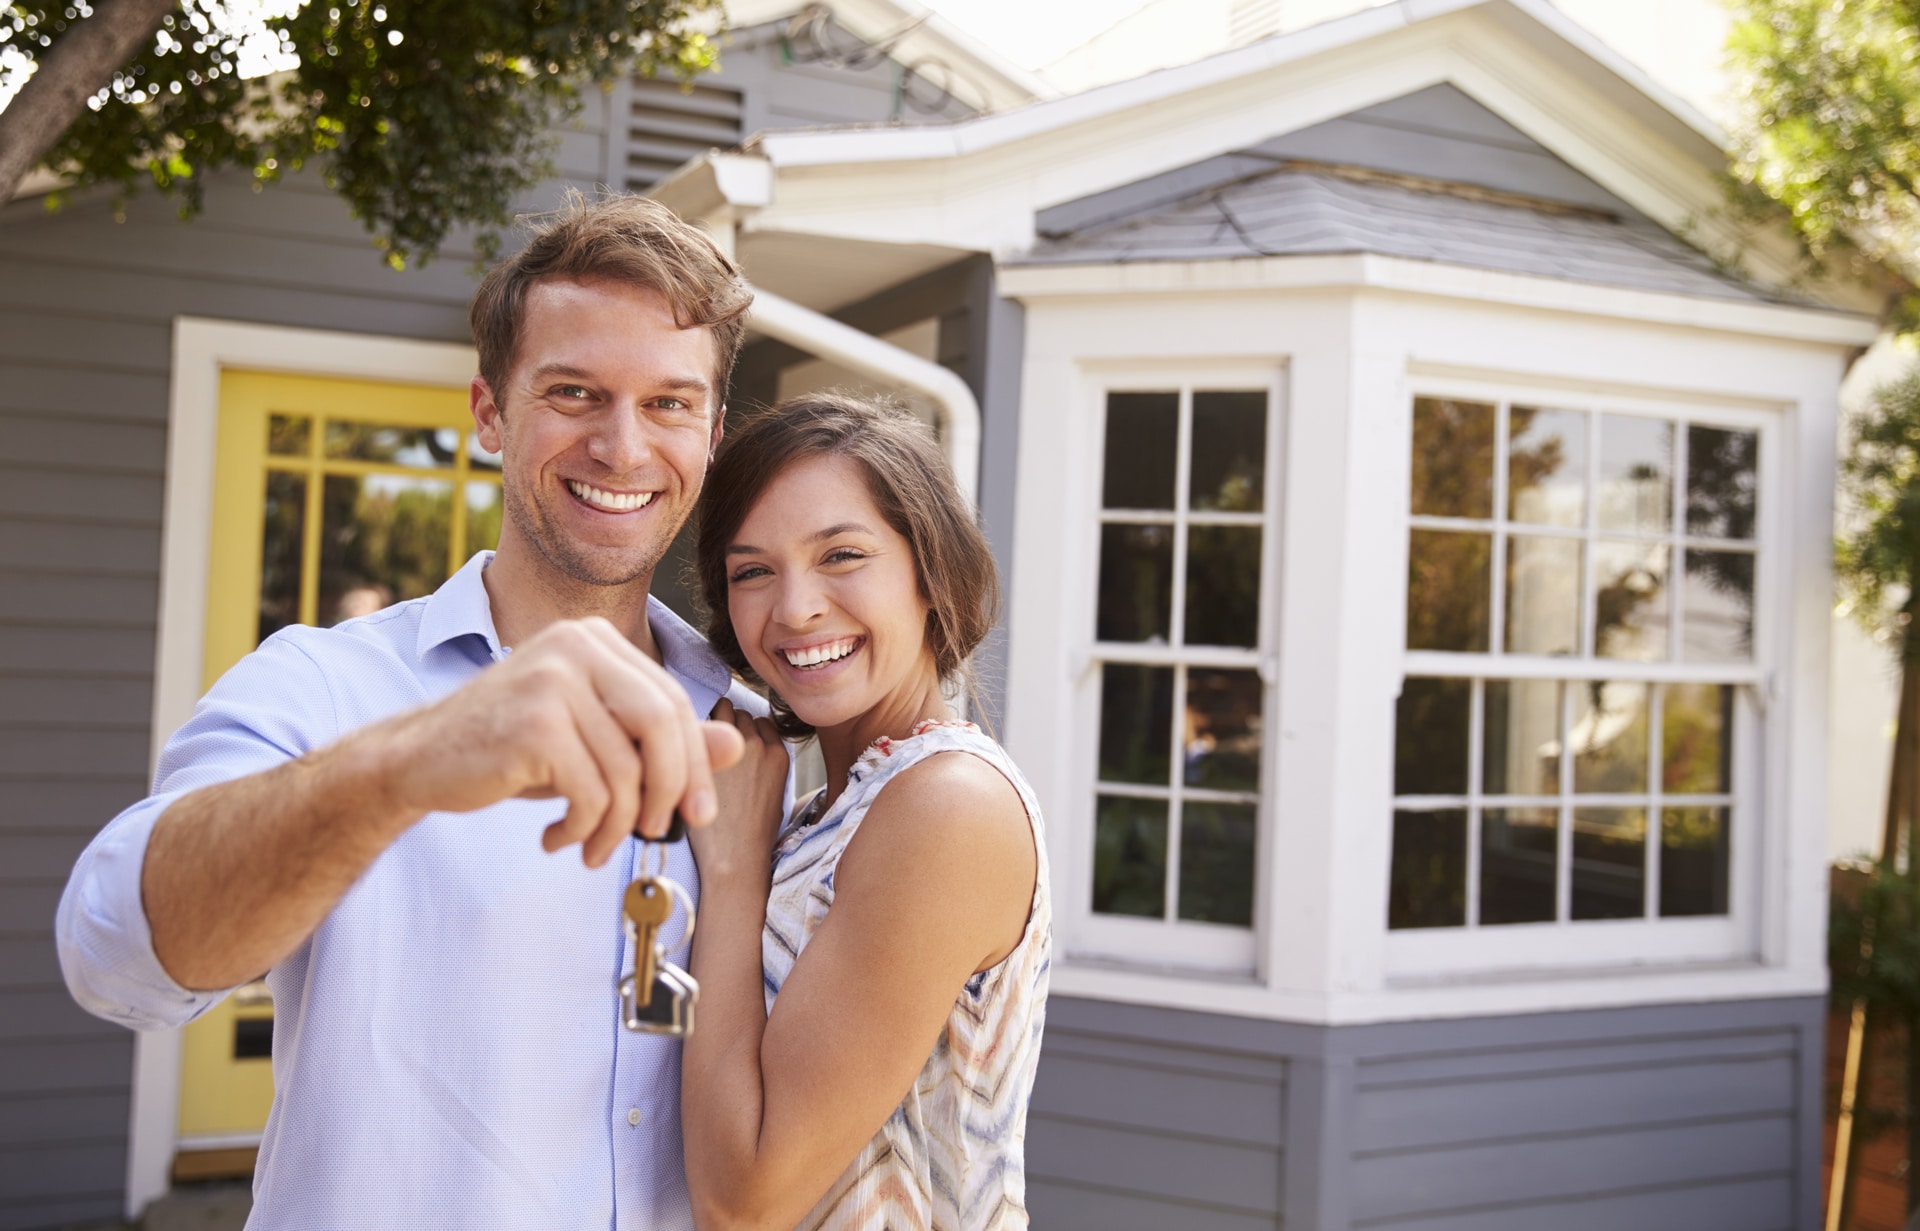 Candid Home Inspections - a happy couple buying a home